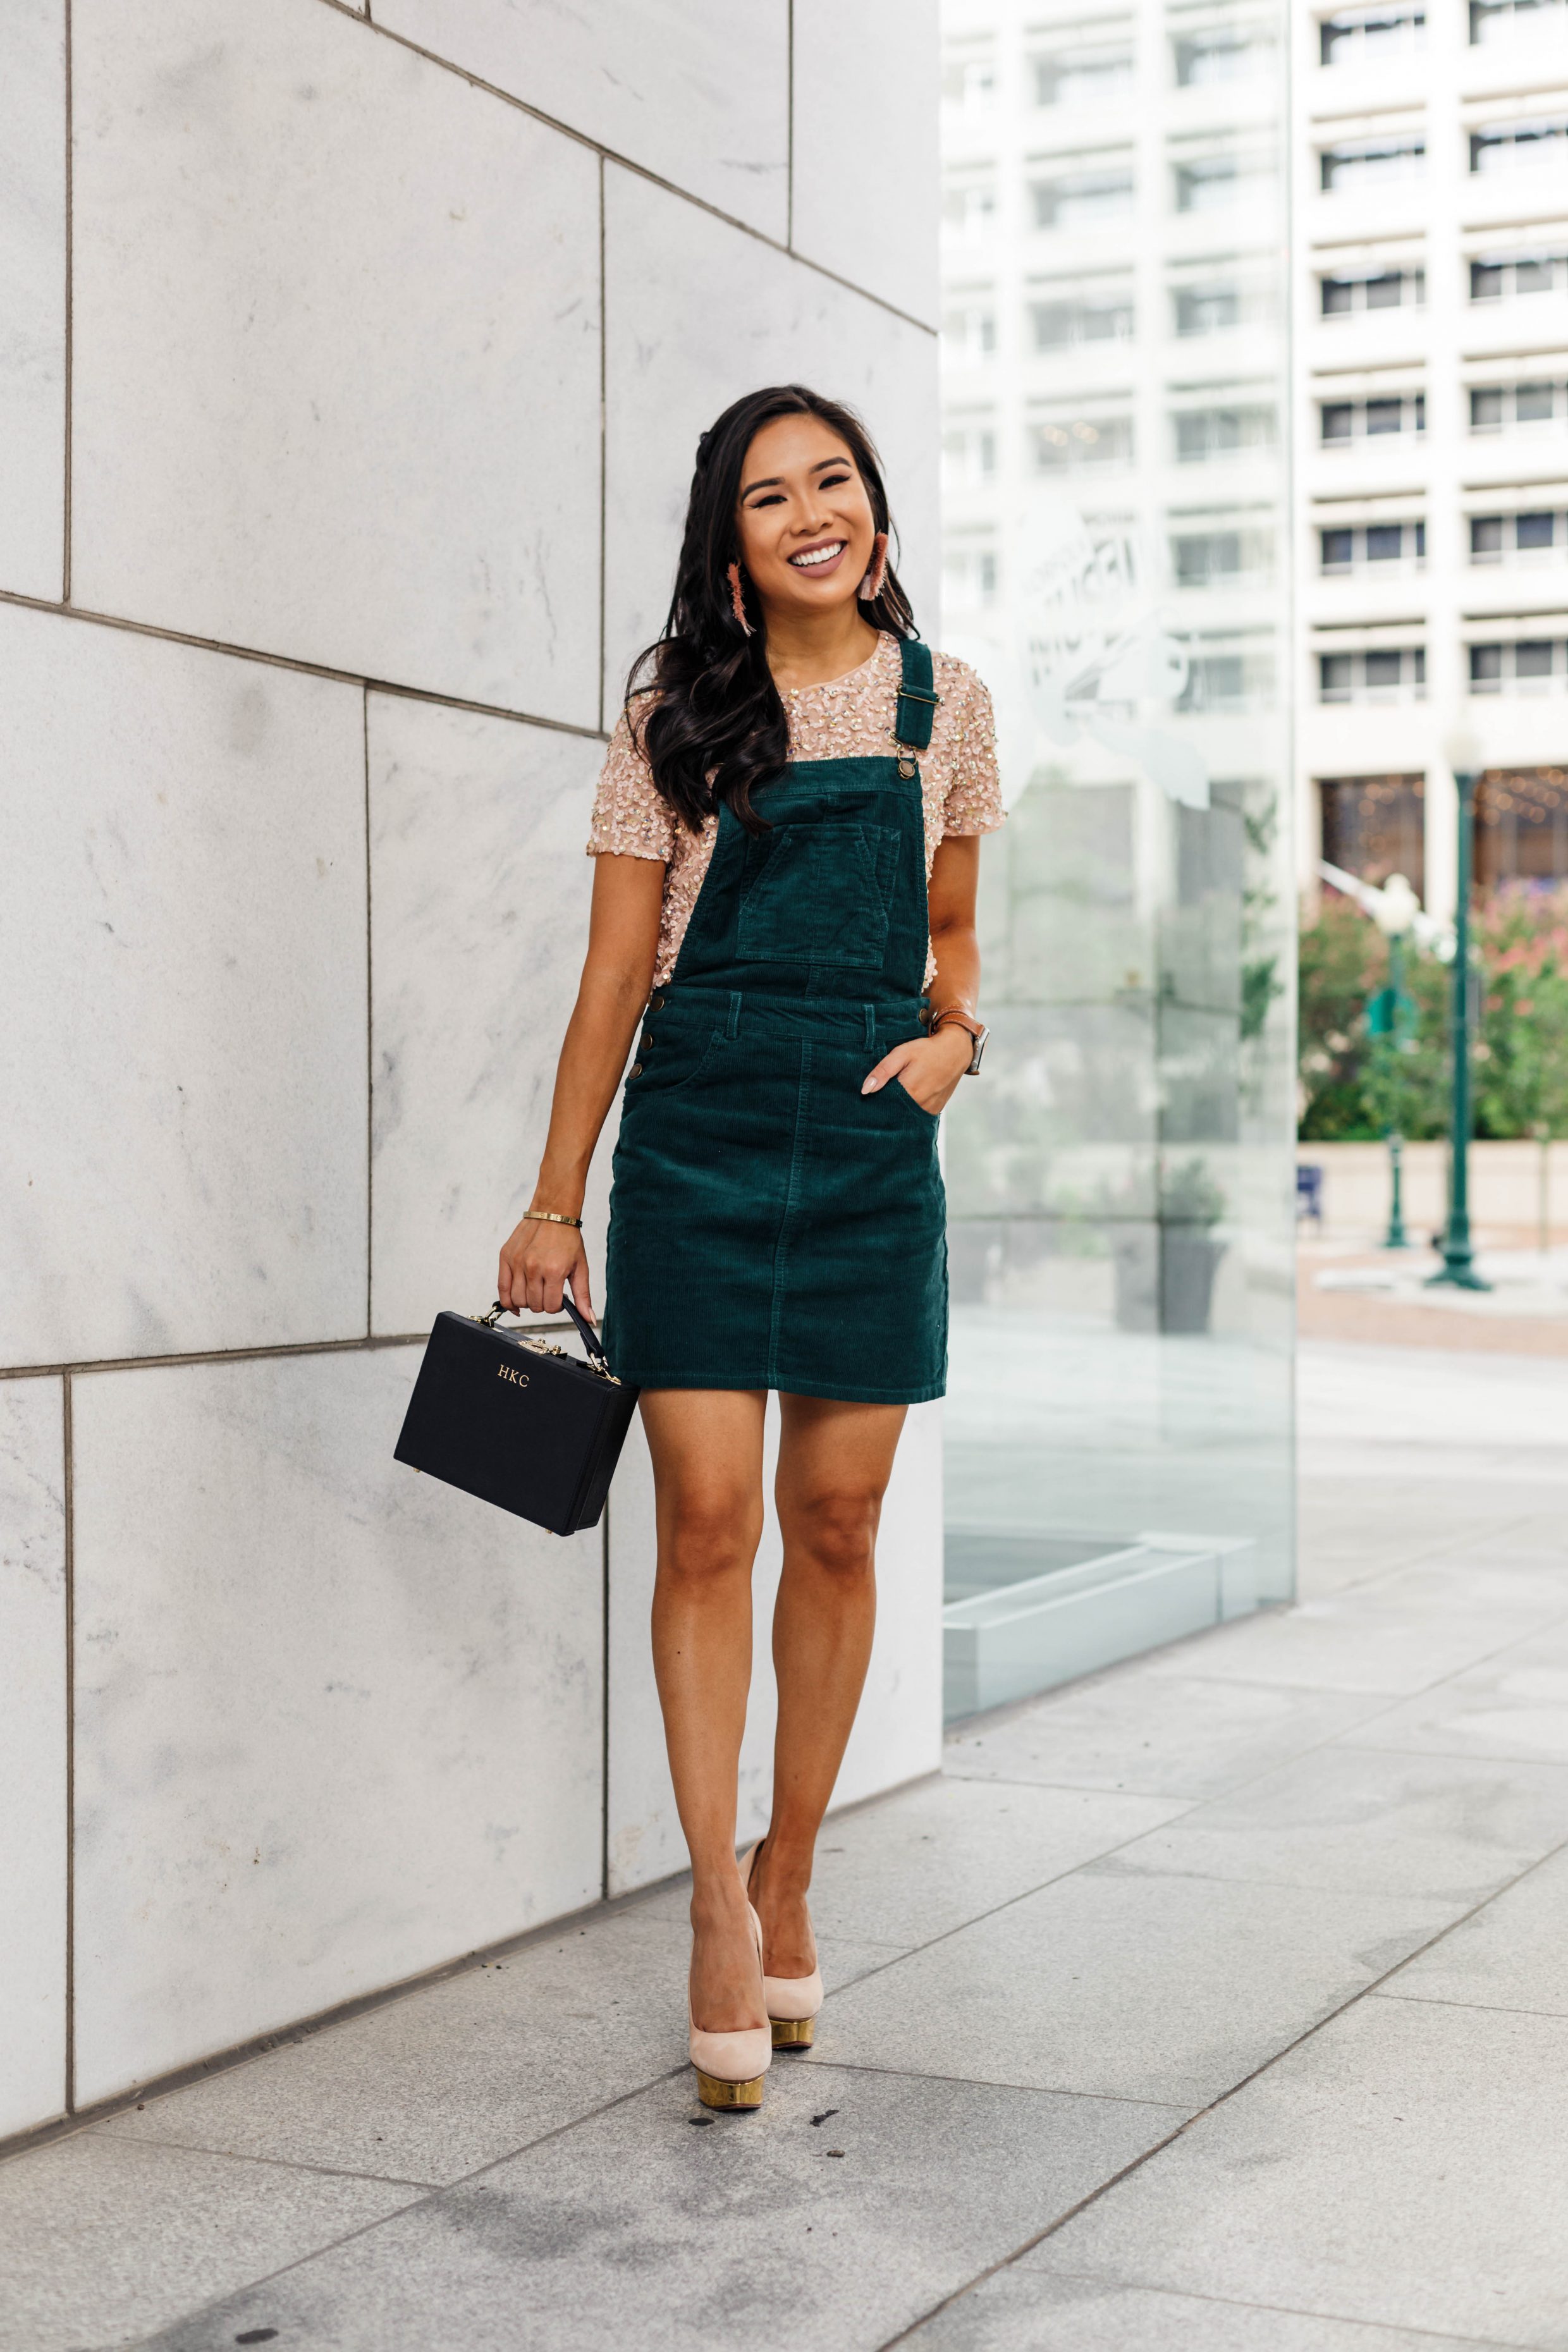 Hoang-Kim wears a green corduroy overall dress with a blush sequin t-shirt for fall